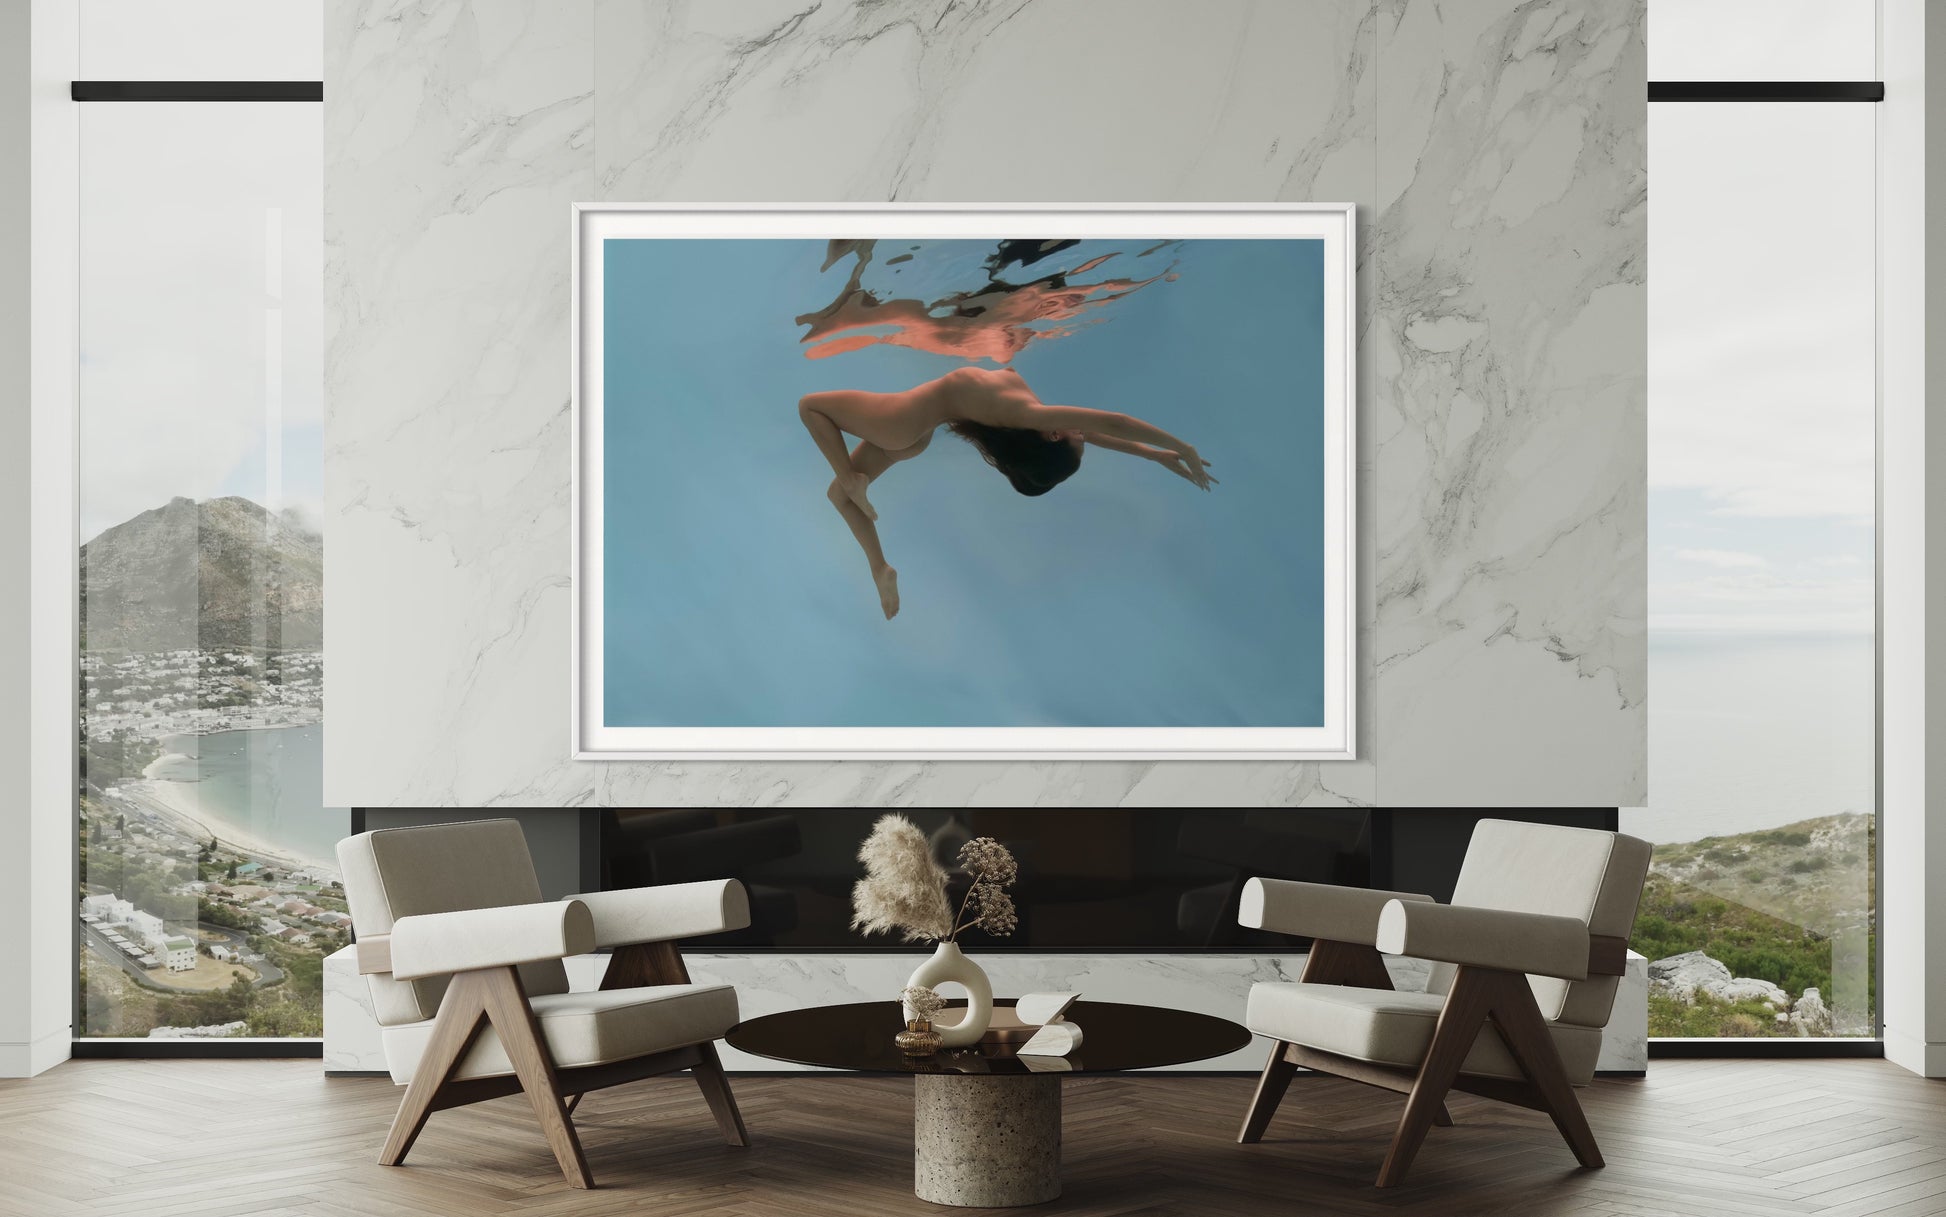 Belinay by Liesel.Art featuring in a hotel lobby: A captivating fine art print featuring two beautiful women floating back to back in the water, representing a reflection. like moonlight on a pond